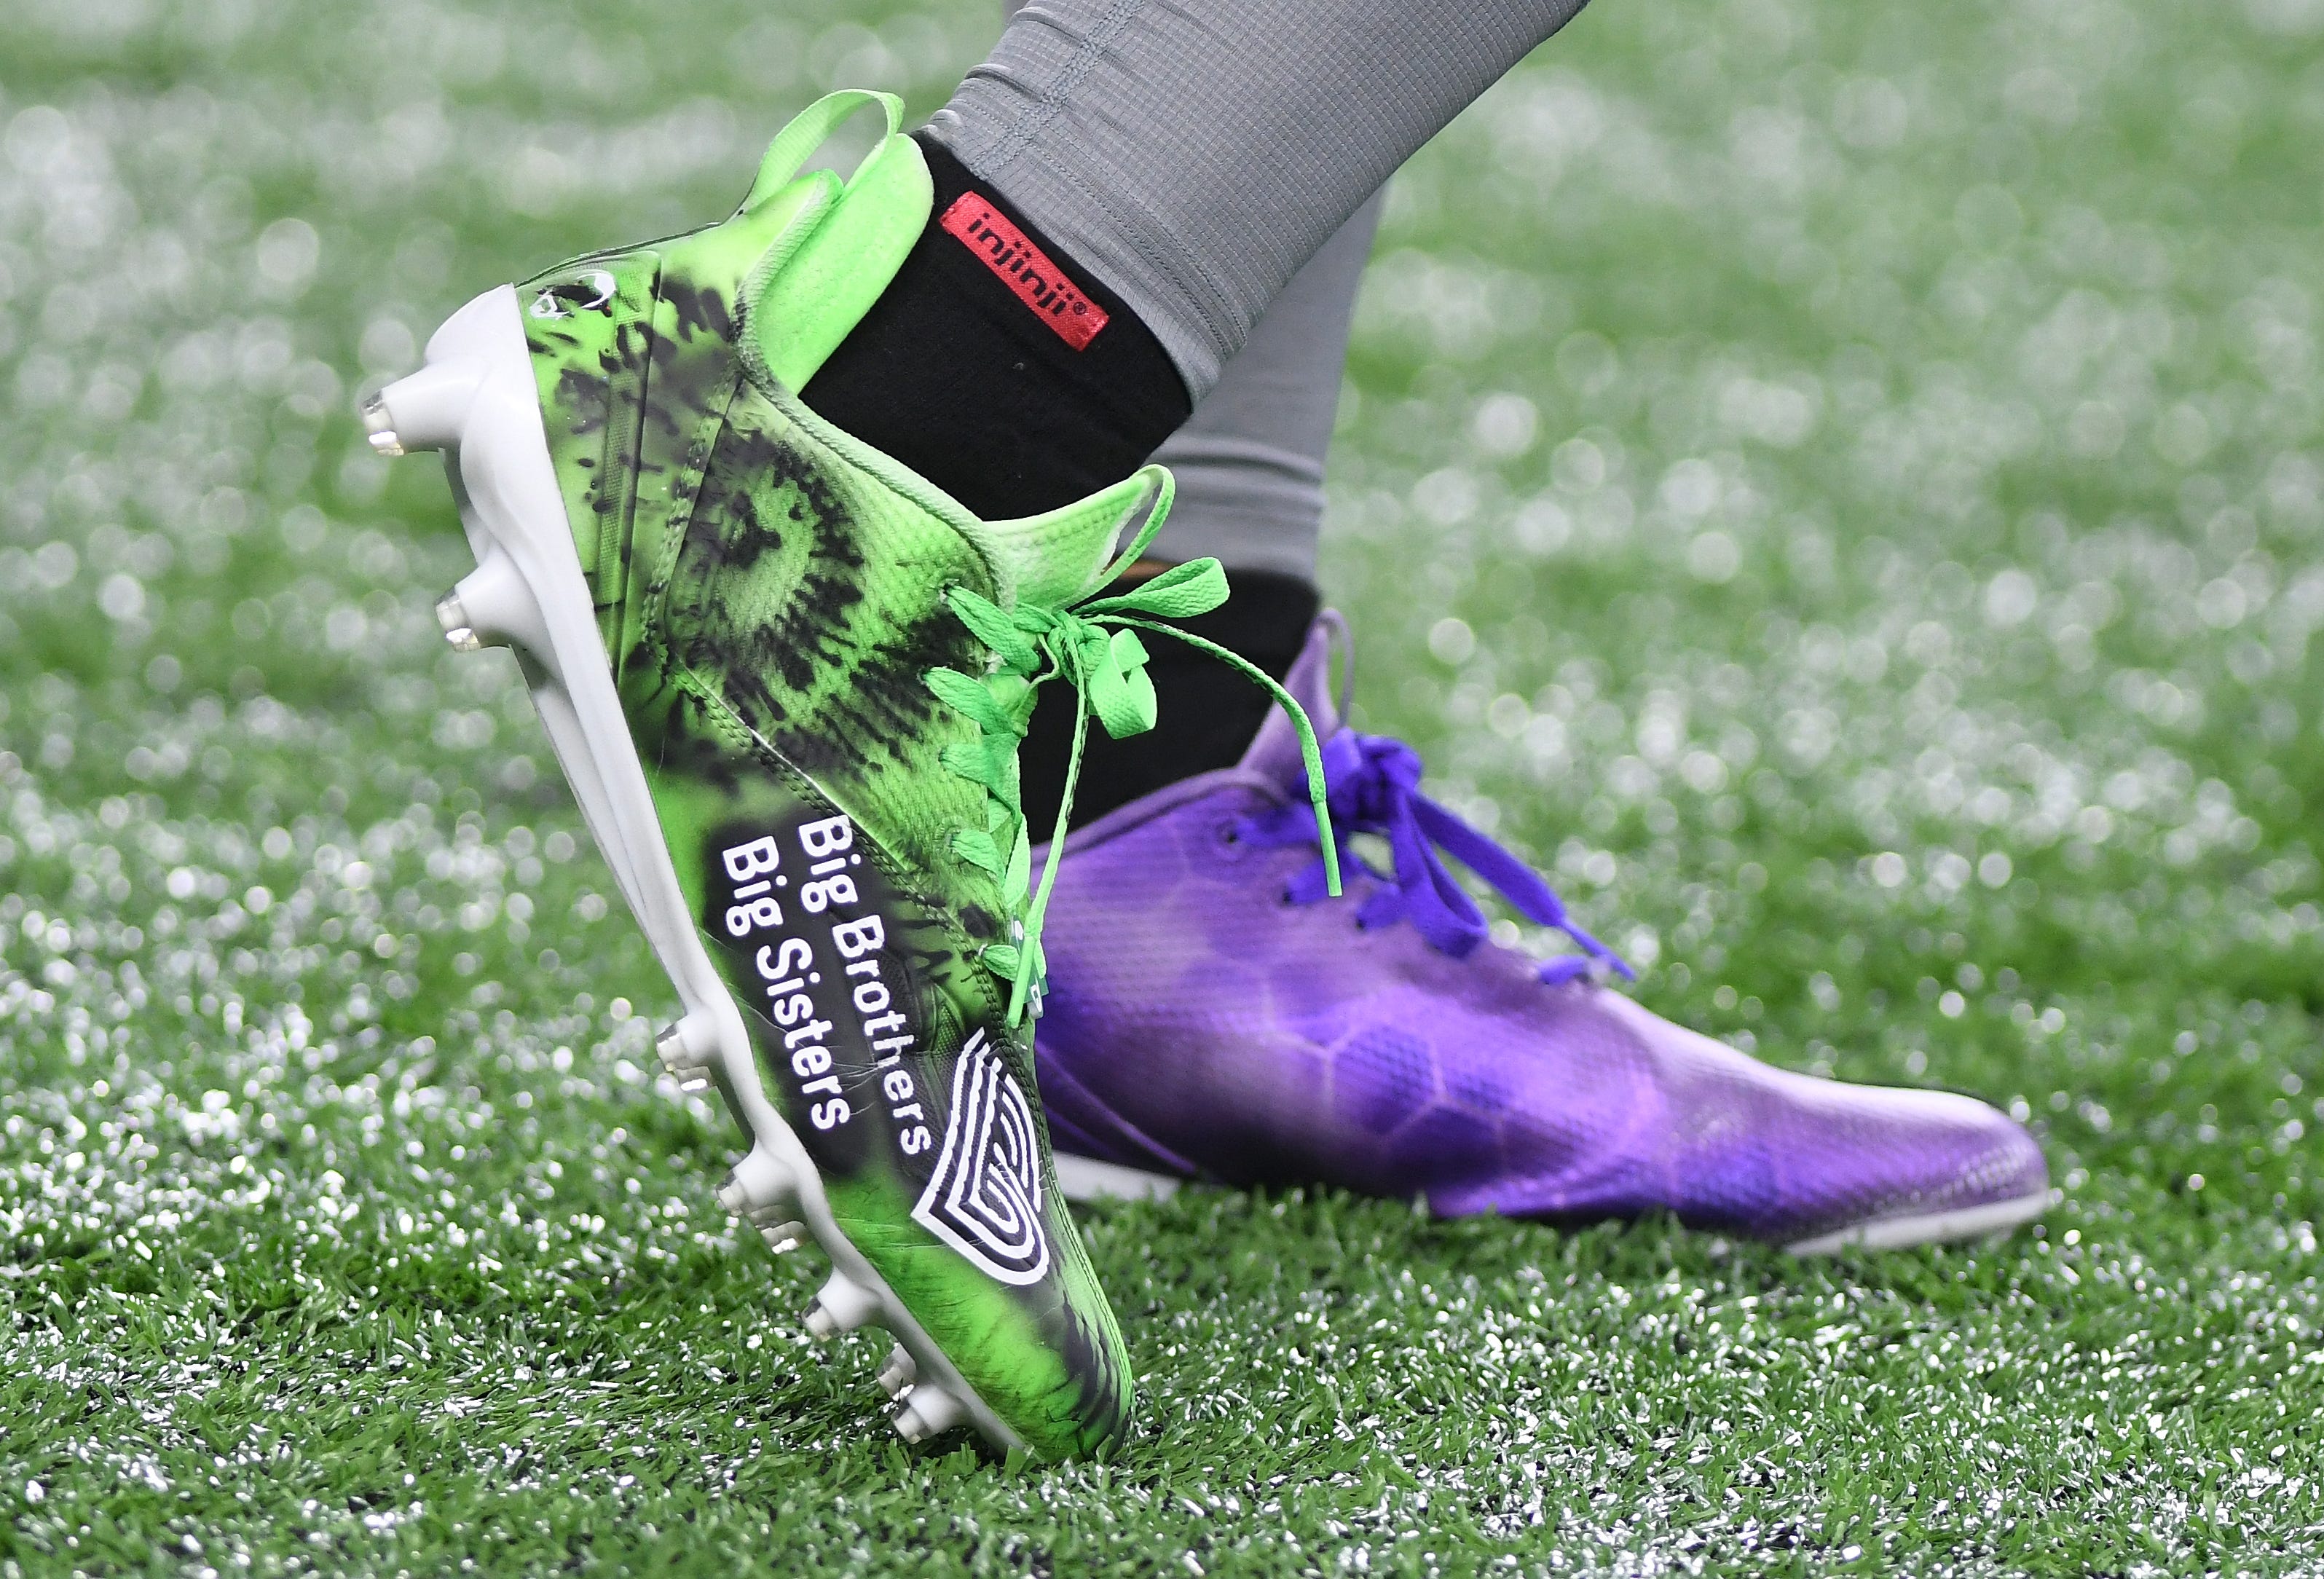 Lions safety Tracy Walker's shoes worn during ';NFL My Cause My Cleats' before the game against the Vikings.